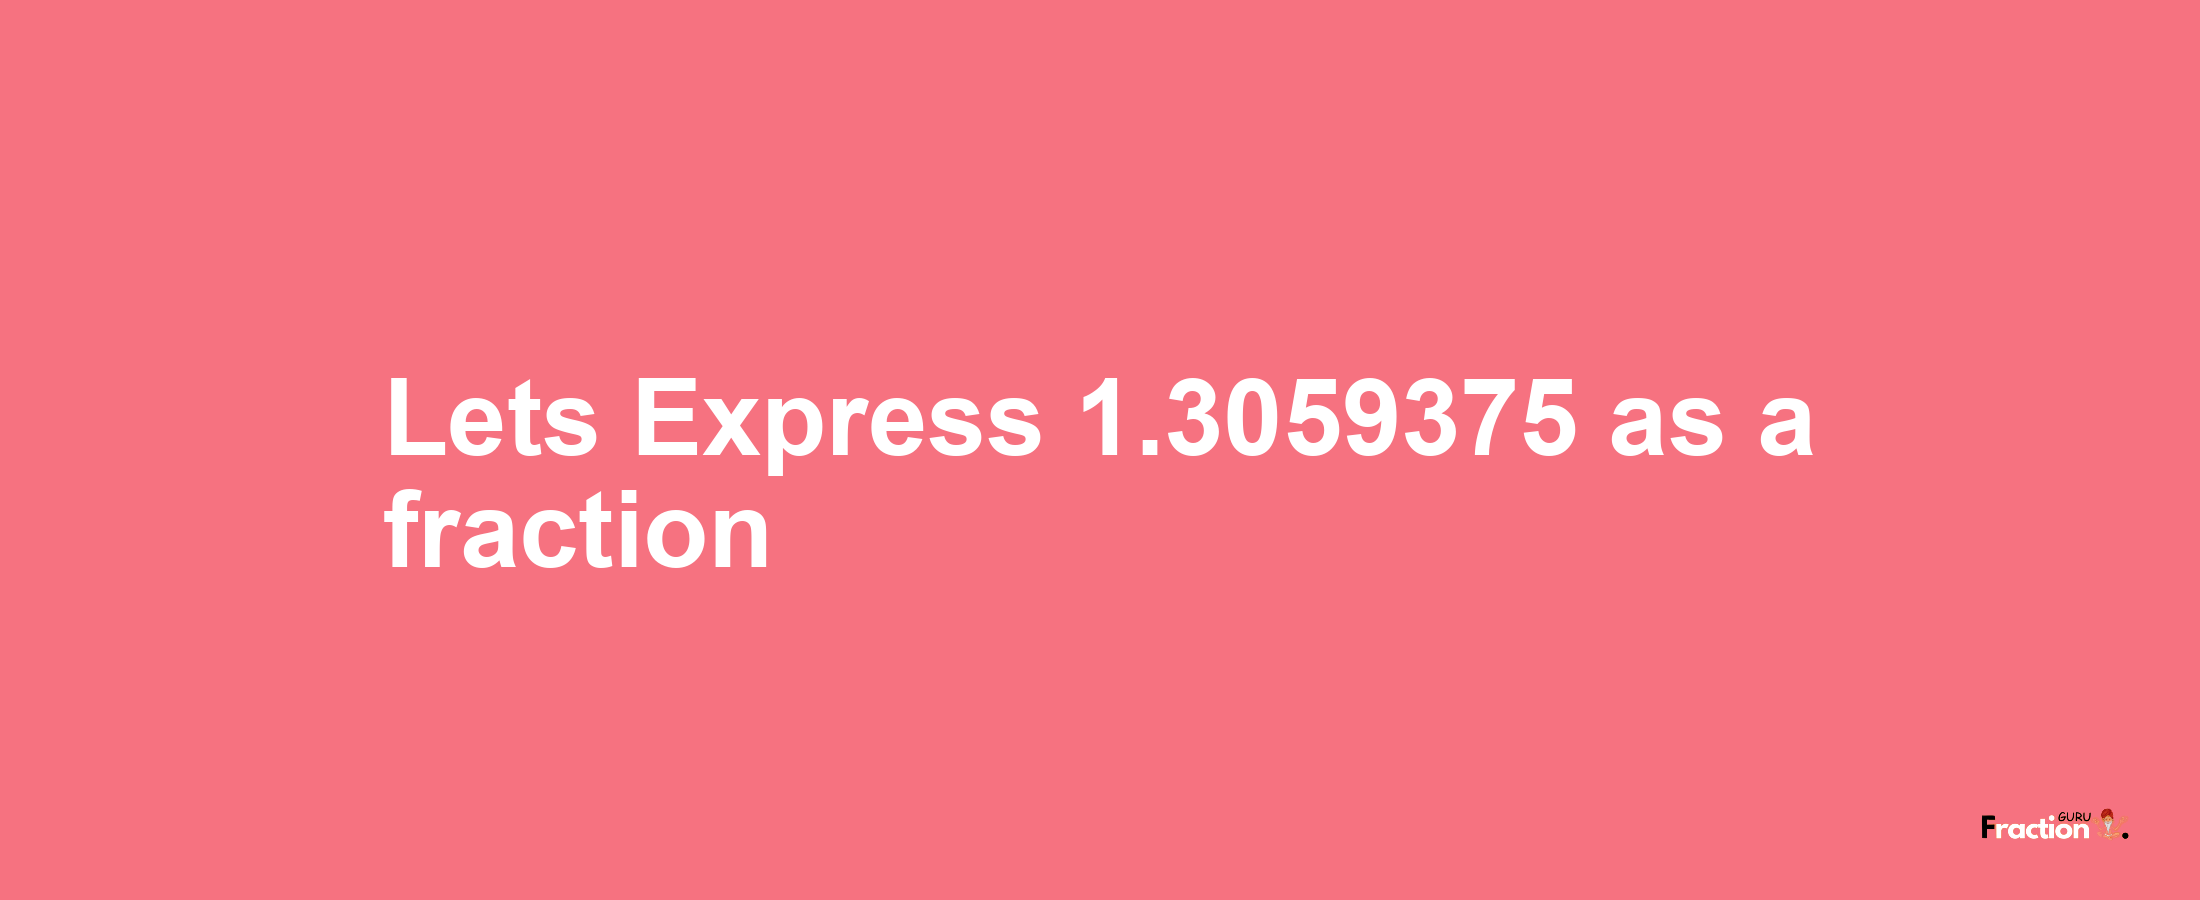 Lets Express 1.3059375 as afraction